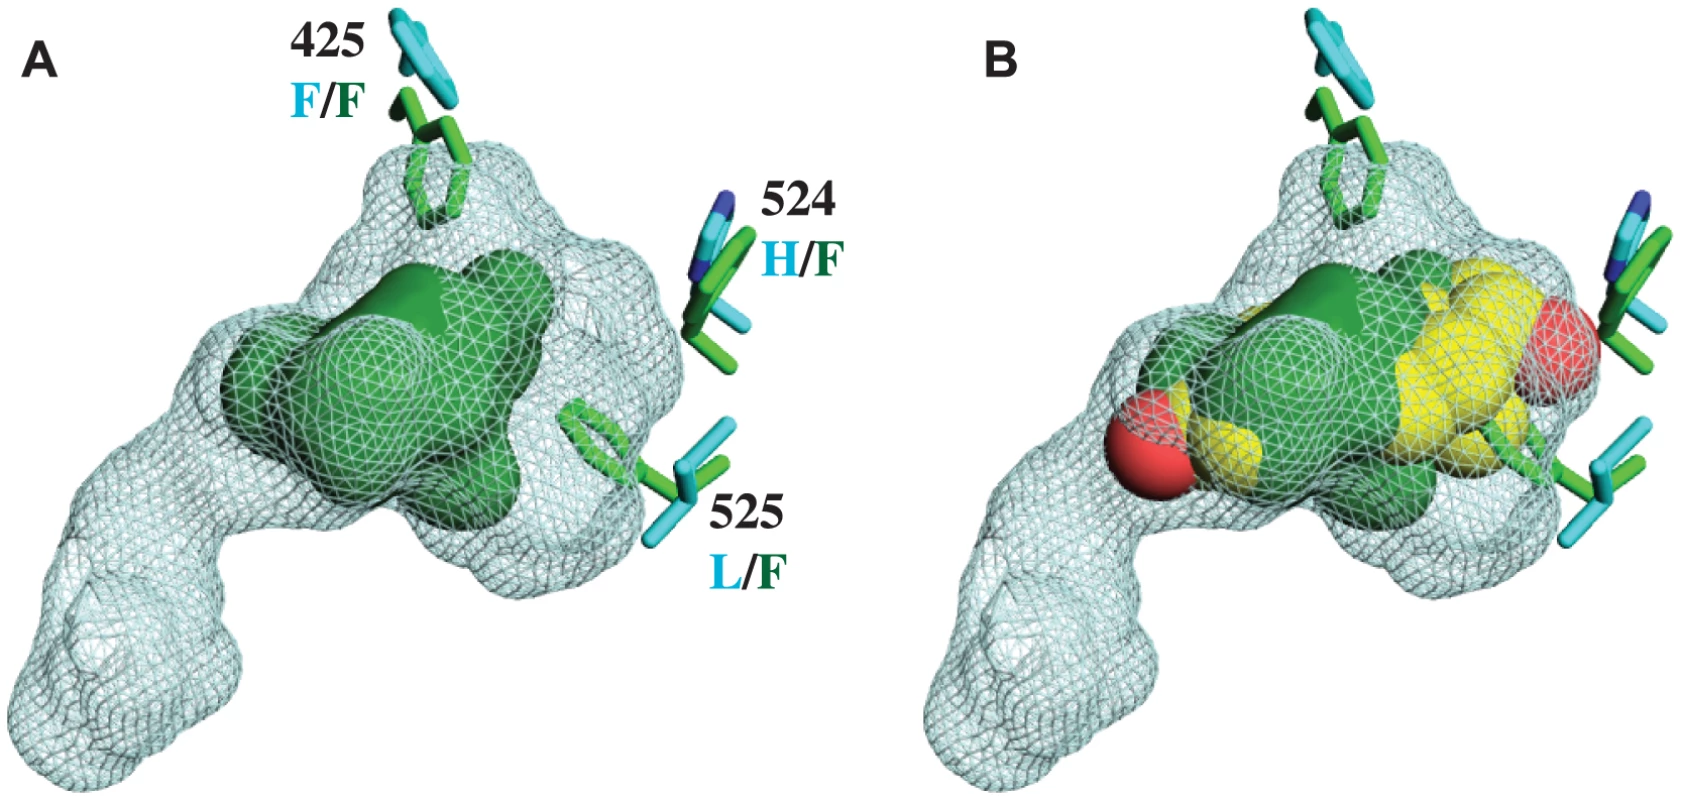 CgER ligand binding pocket is too small to accommodate estradiol.